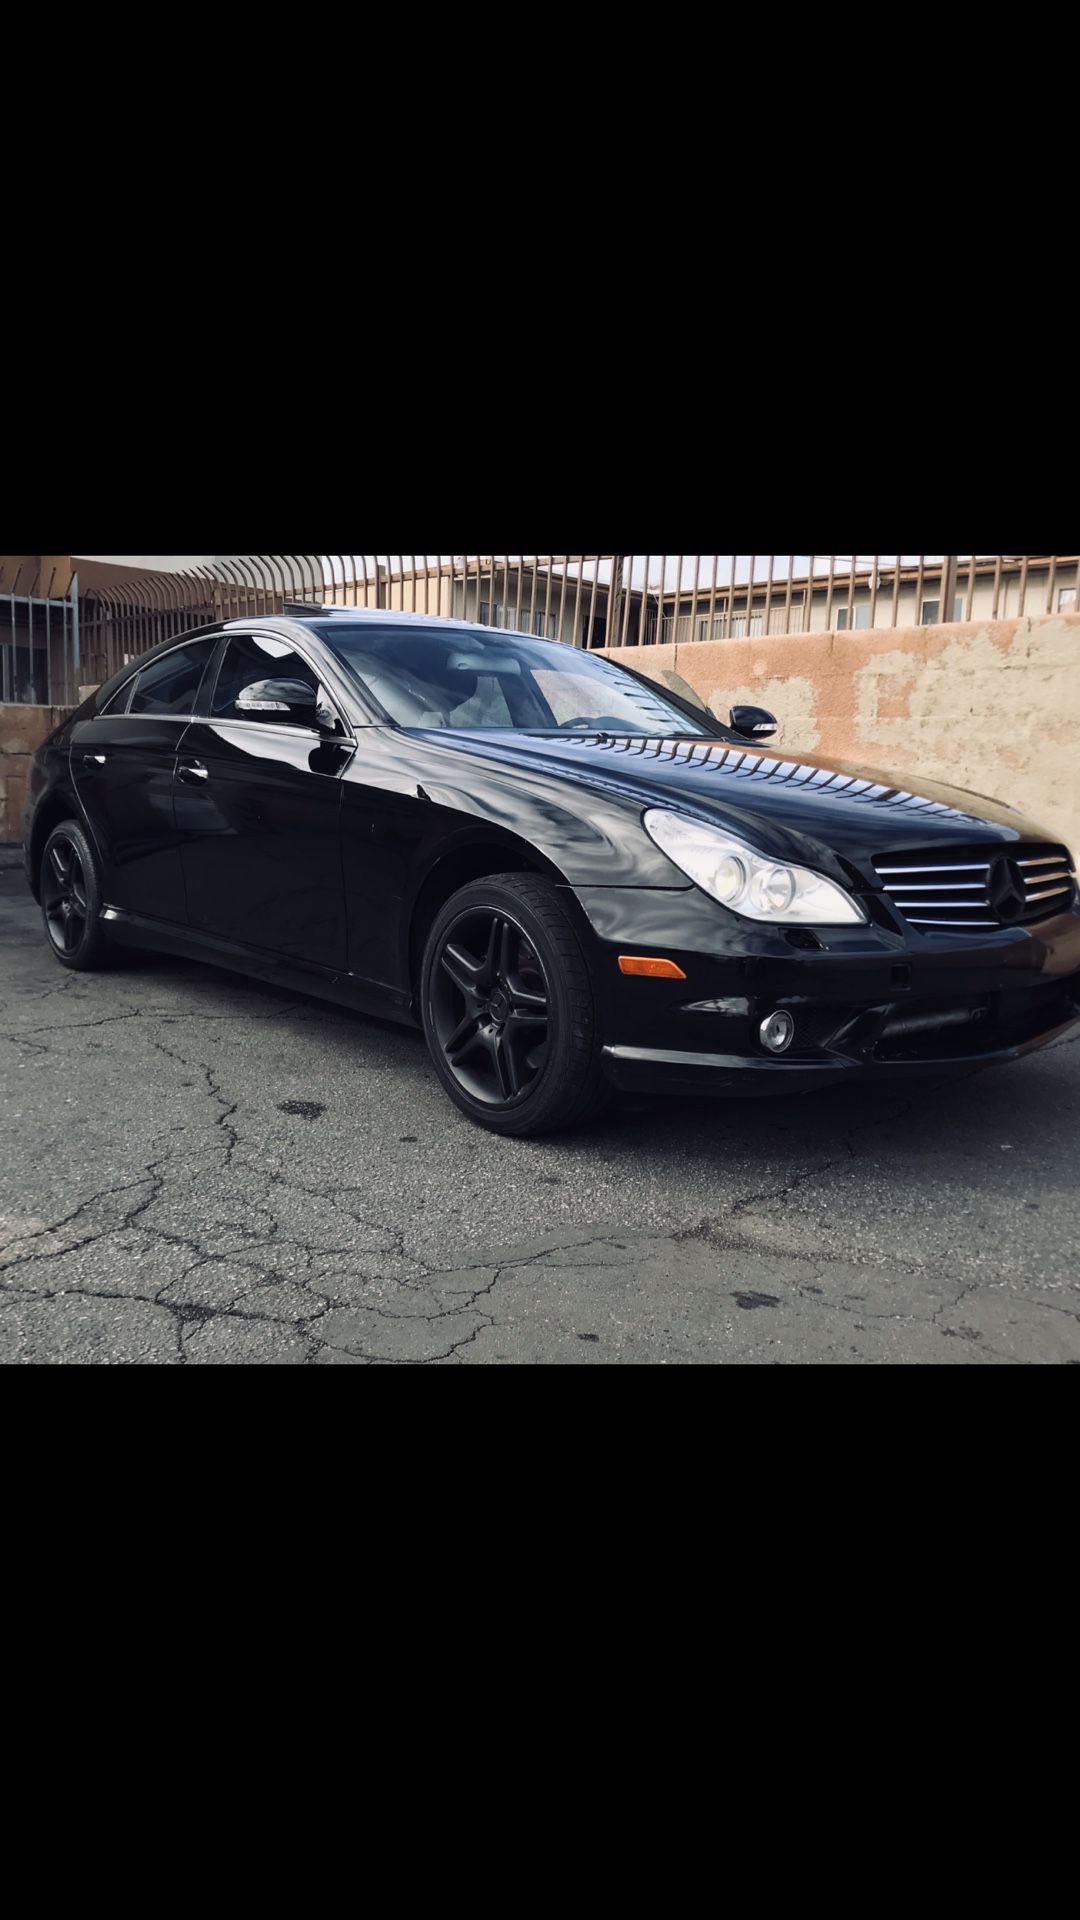 $5000 obo cls500 AMG